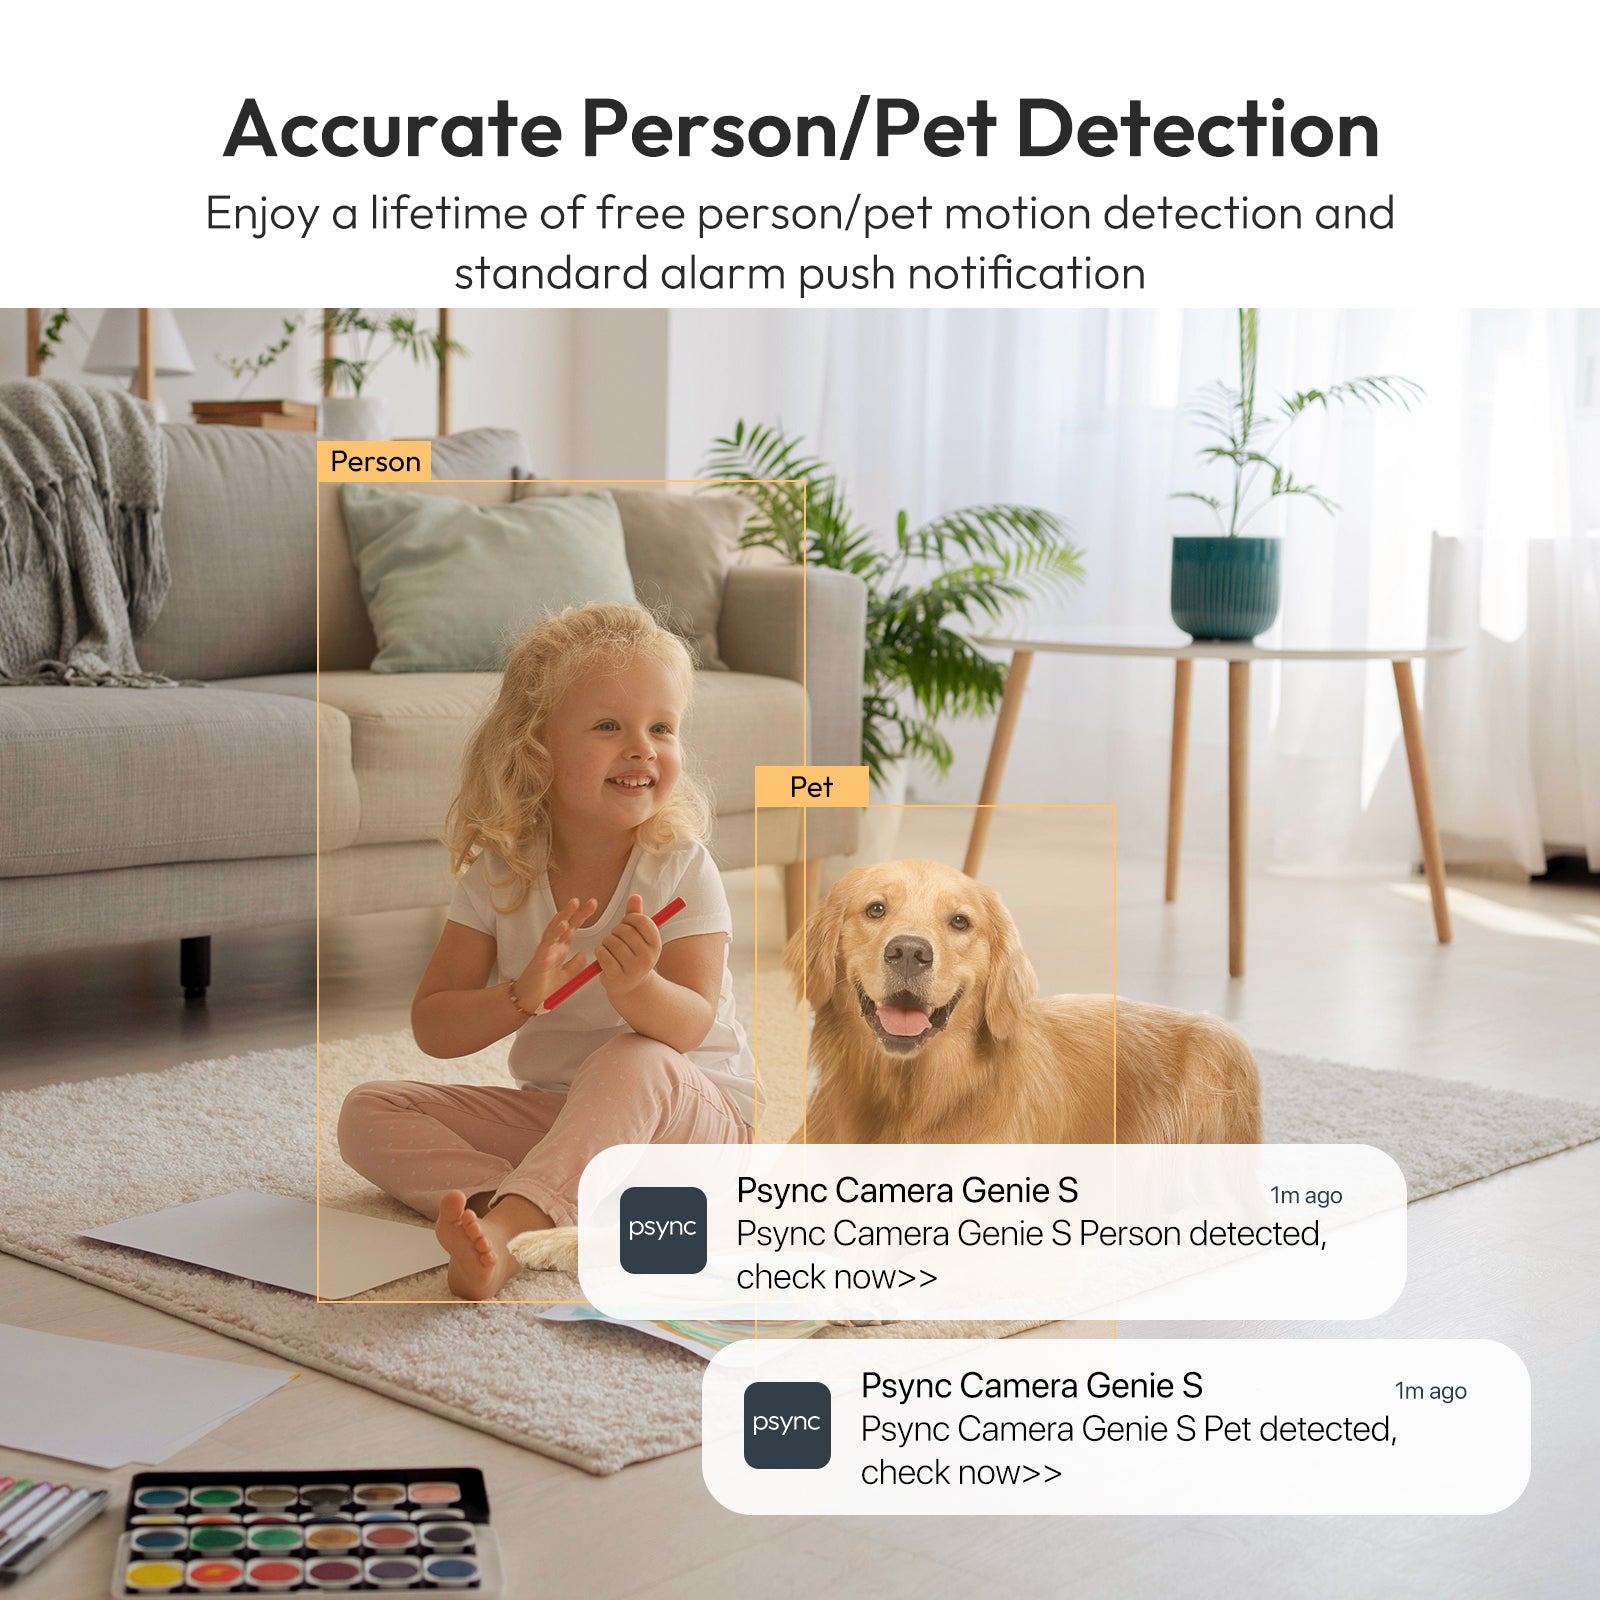 Psync Camera Genie S in action showing a detected alert for a young girl and her golden retriever in a living room, emphasizing the device's accurate person and pet detection capabilities.